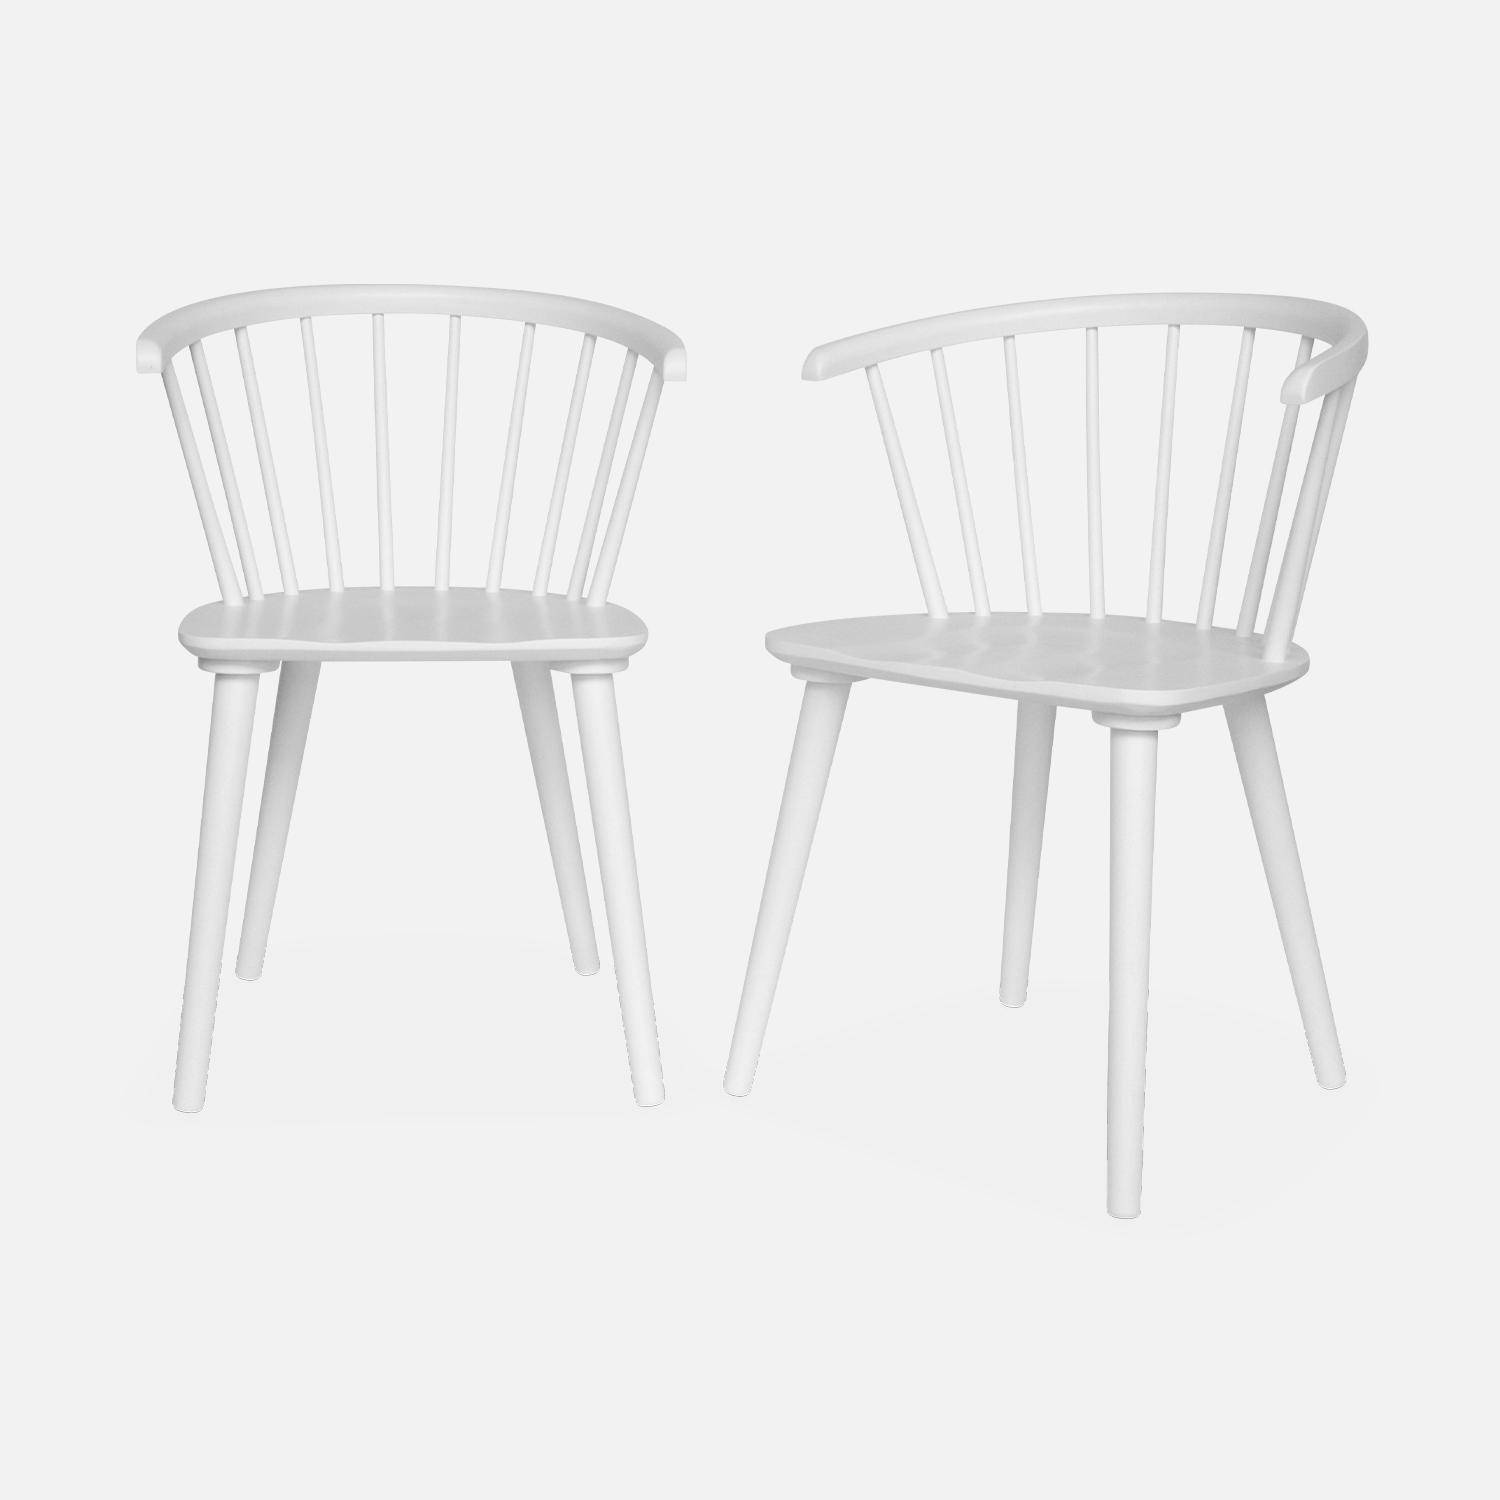 Pair of Wood and Plywood Spindle Chairs, white, L53 x W47.5 x H76cm Photo3